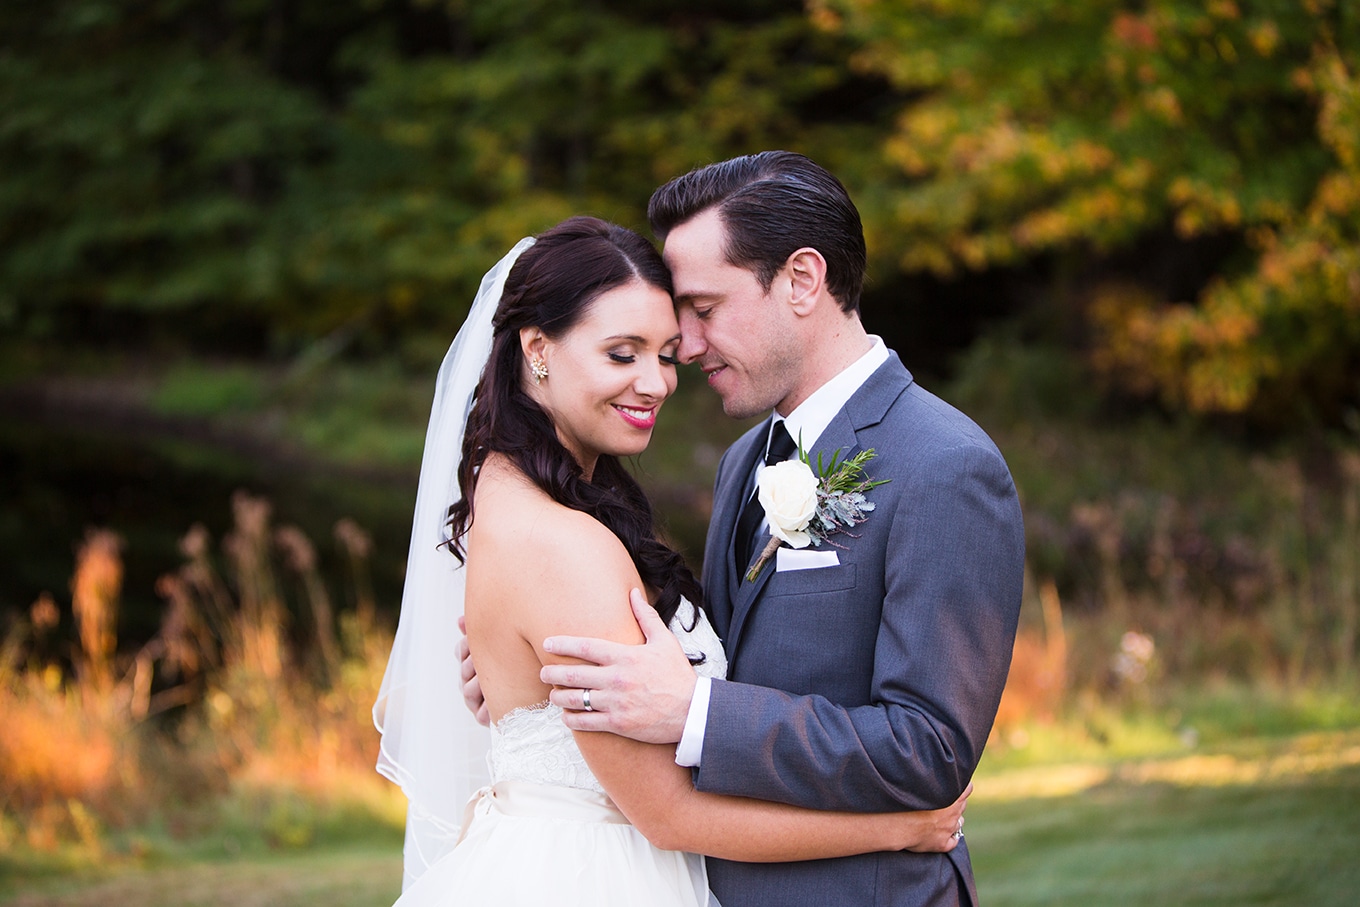 A sweet portrait of a bride and groom during their Harrington Farm Wedding in Princeton, Massachusetts